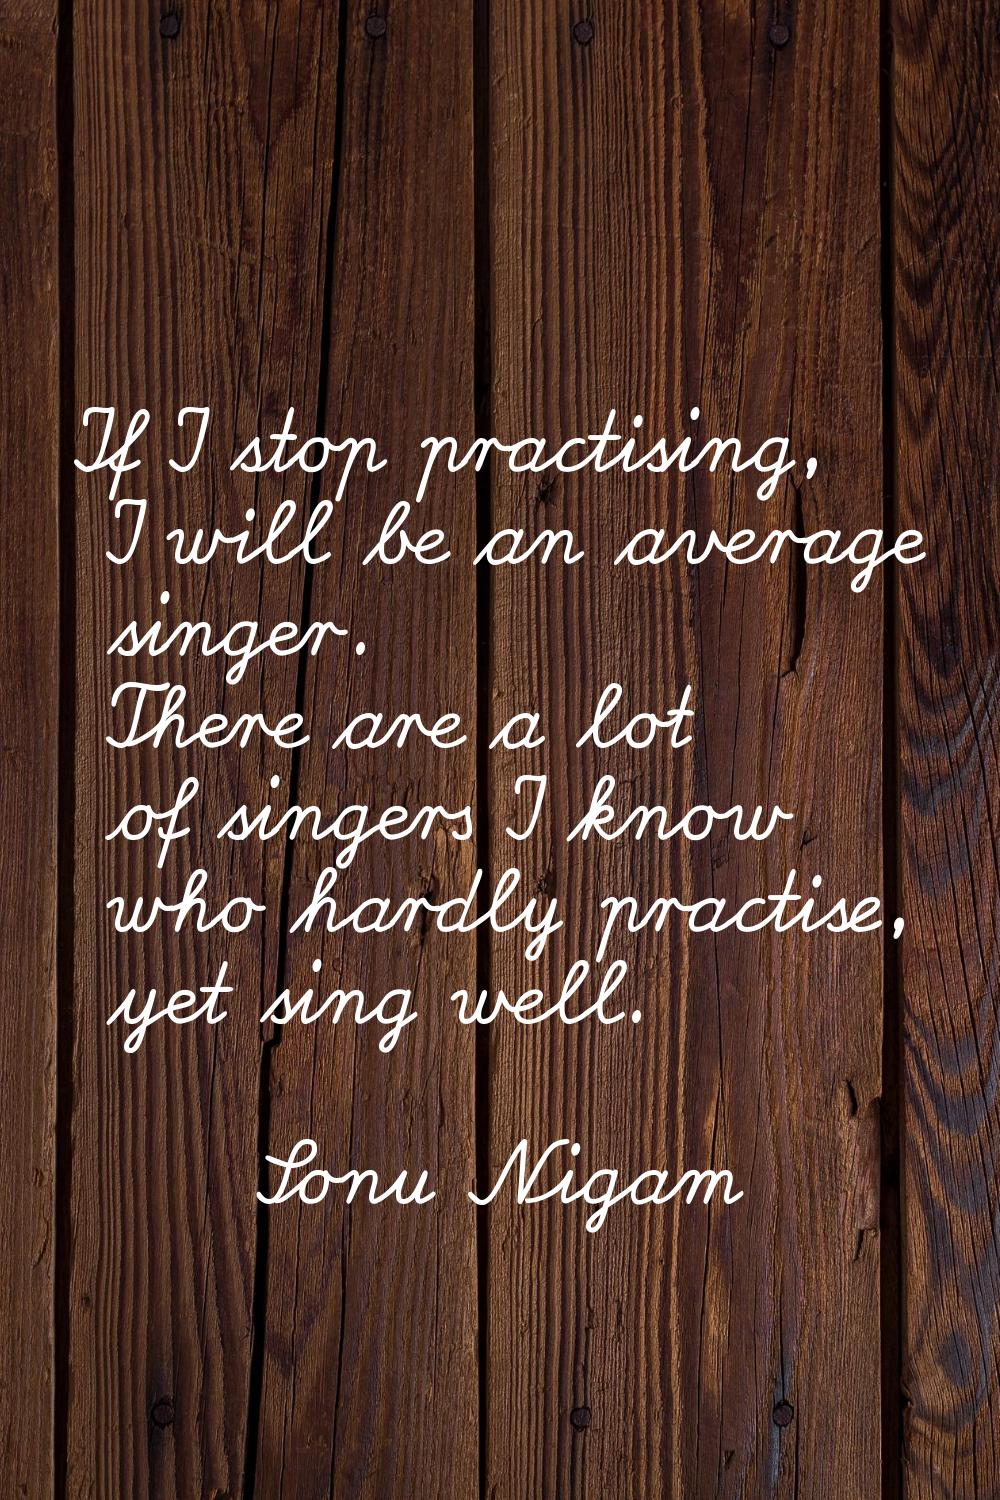 If I stop practising, I will be an average singer. There are a lot of singers I know who hardly pra